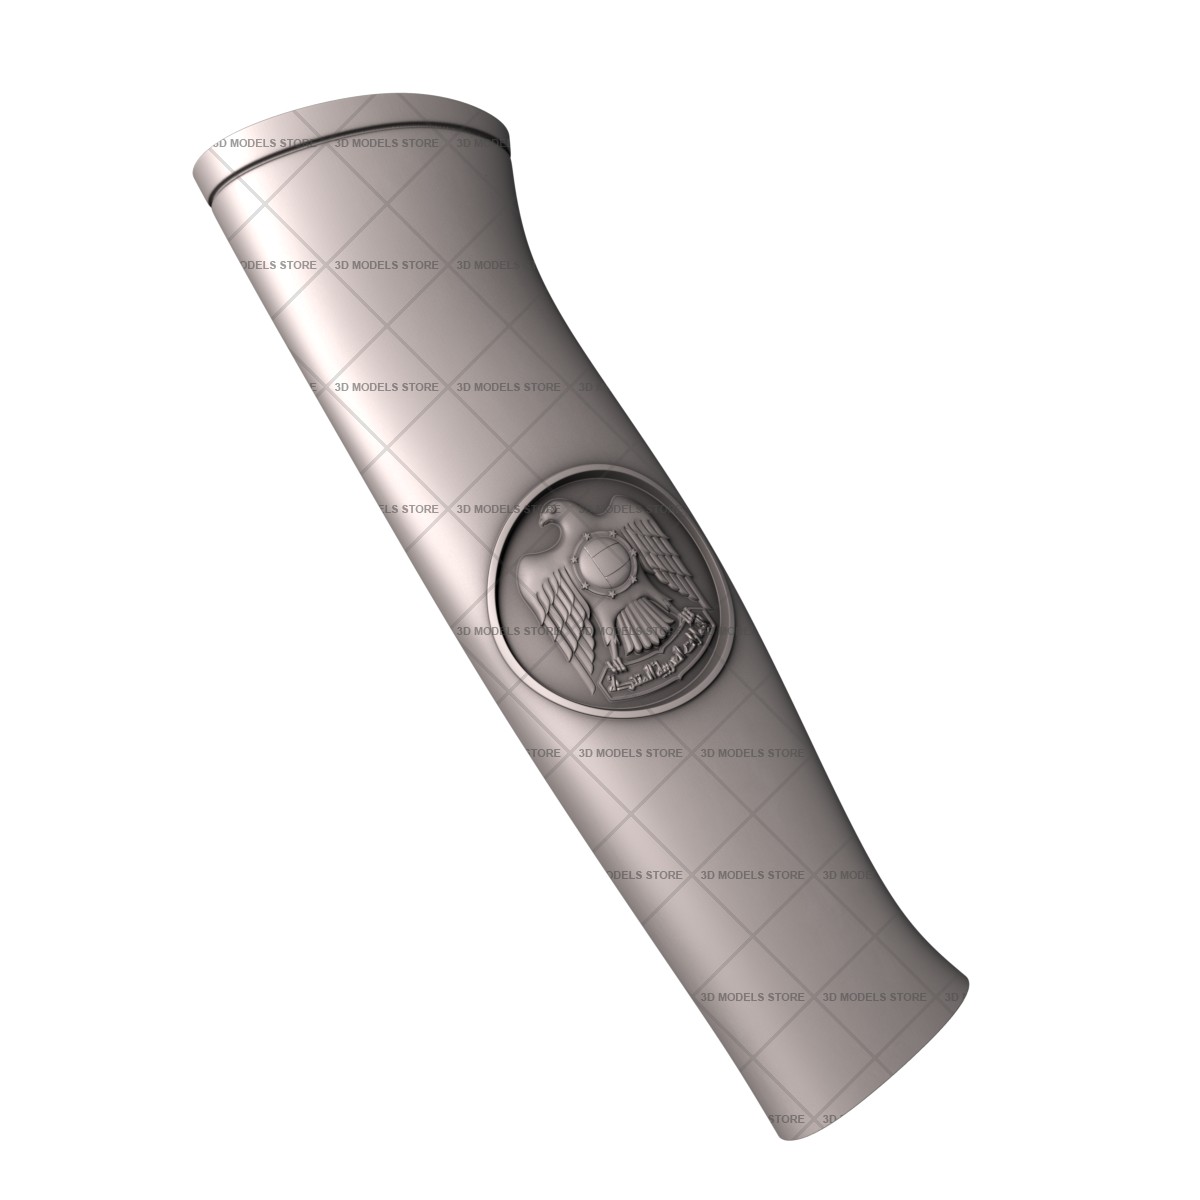 Handle with the emblem of the united arab emirates, 3d models (stl)